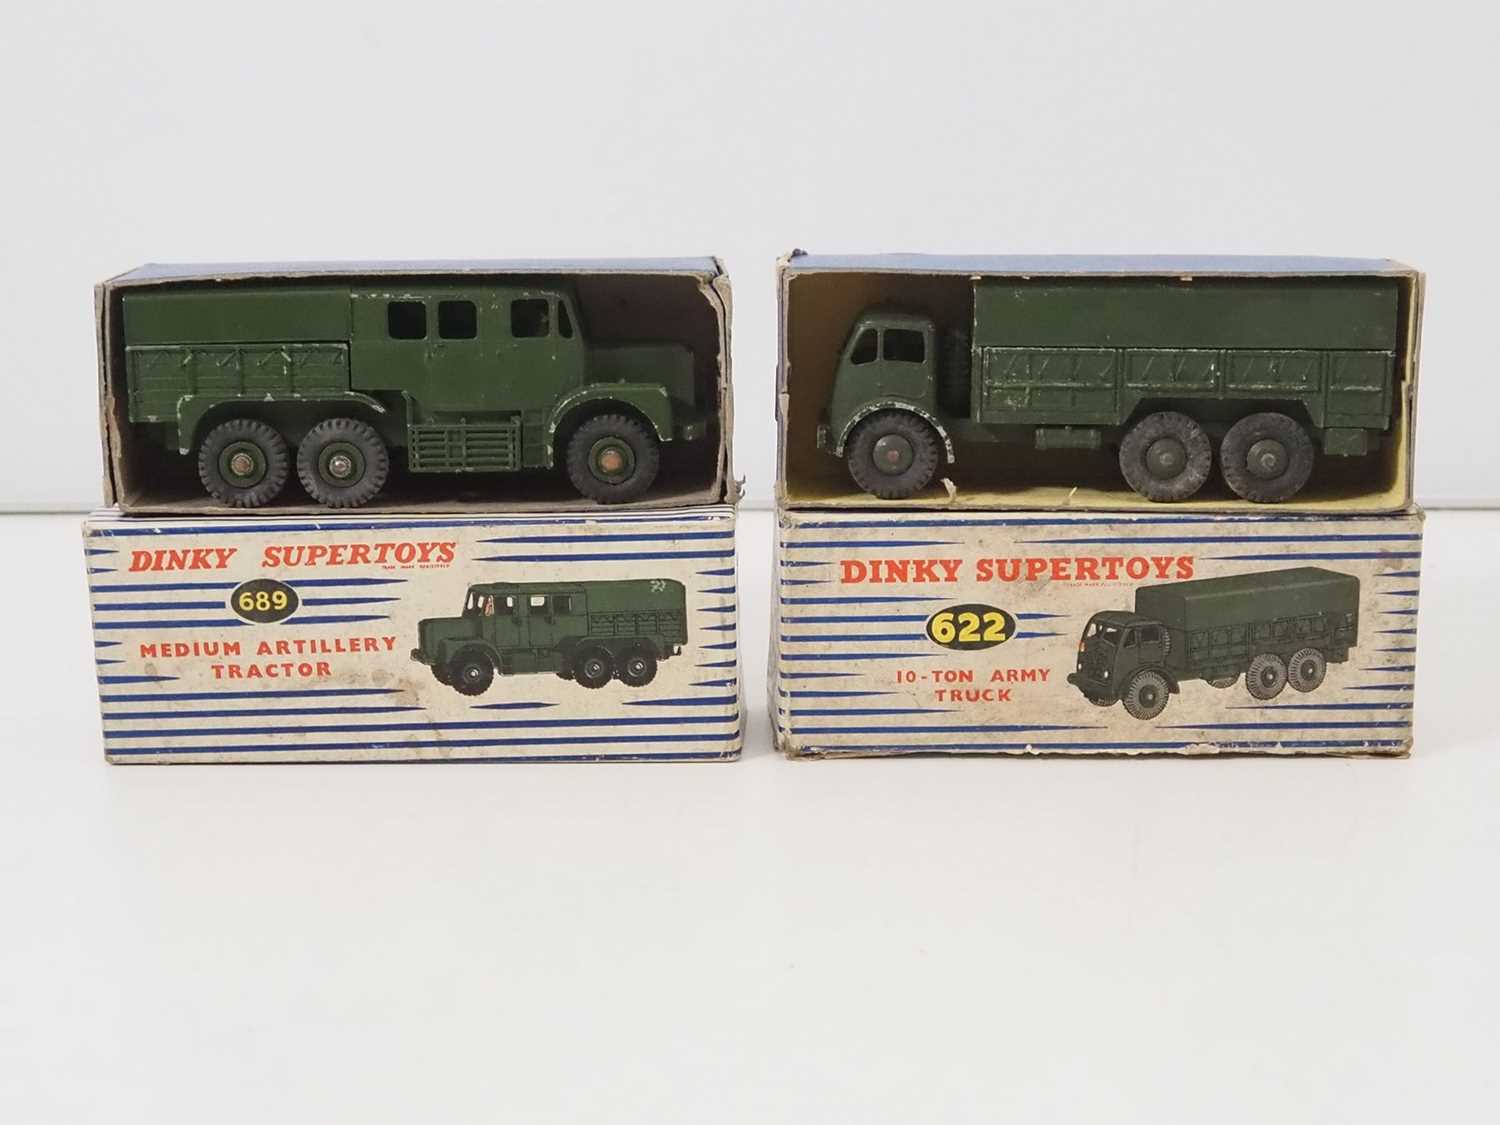 A pair of DINKY Supertoys military vehicles comprising a 622 10-ton army truck together with a 689